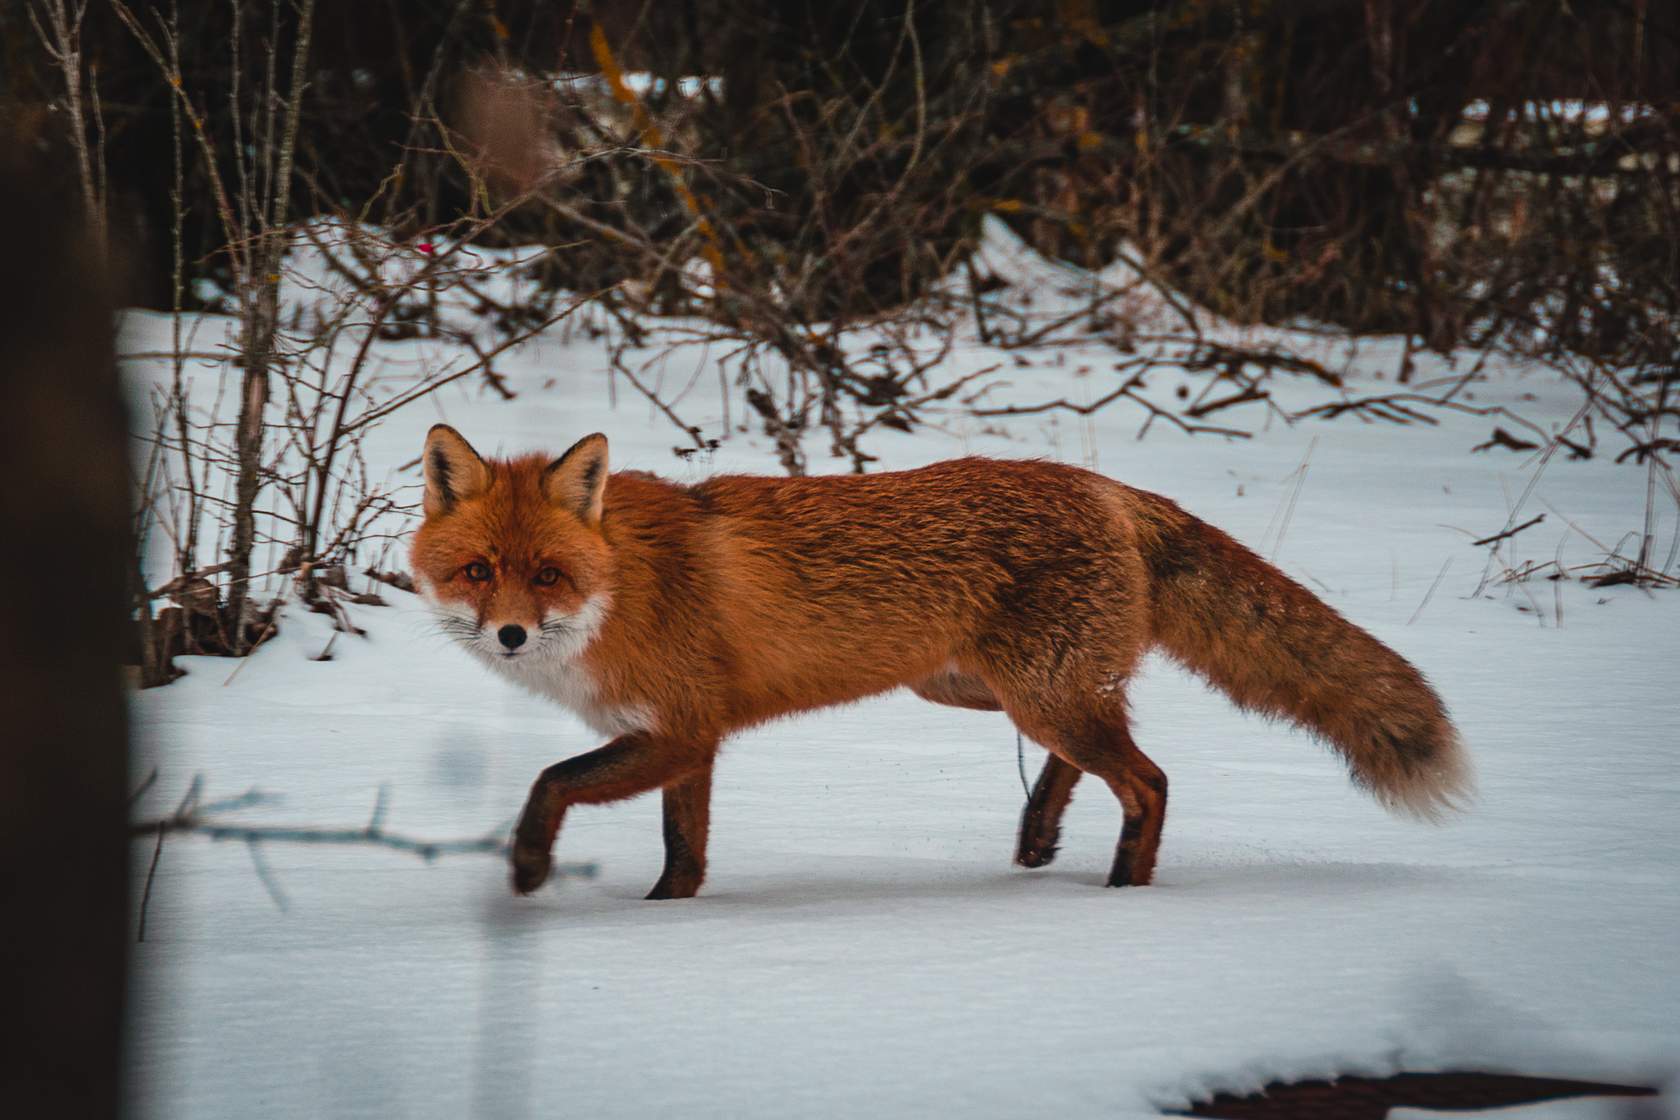 A red fox walking through the snow, symbolizing RFT0206.